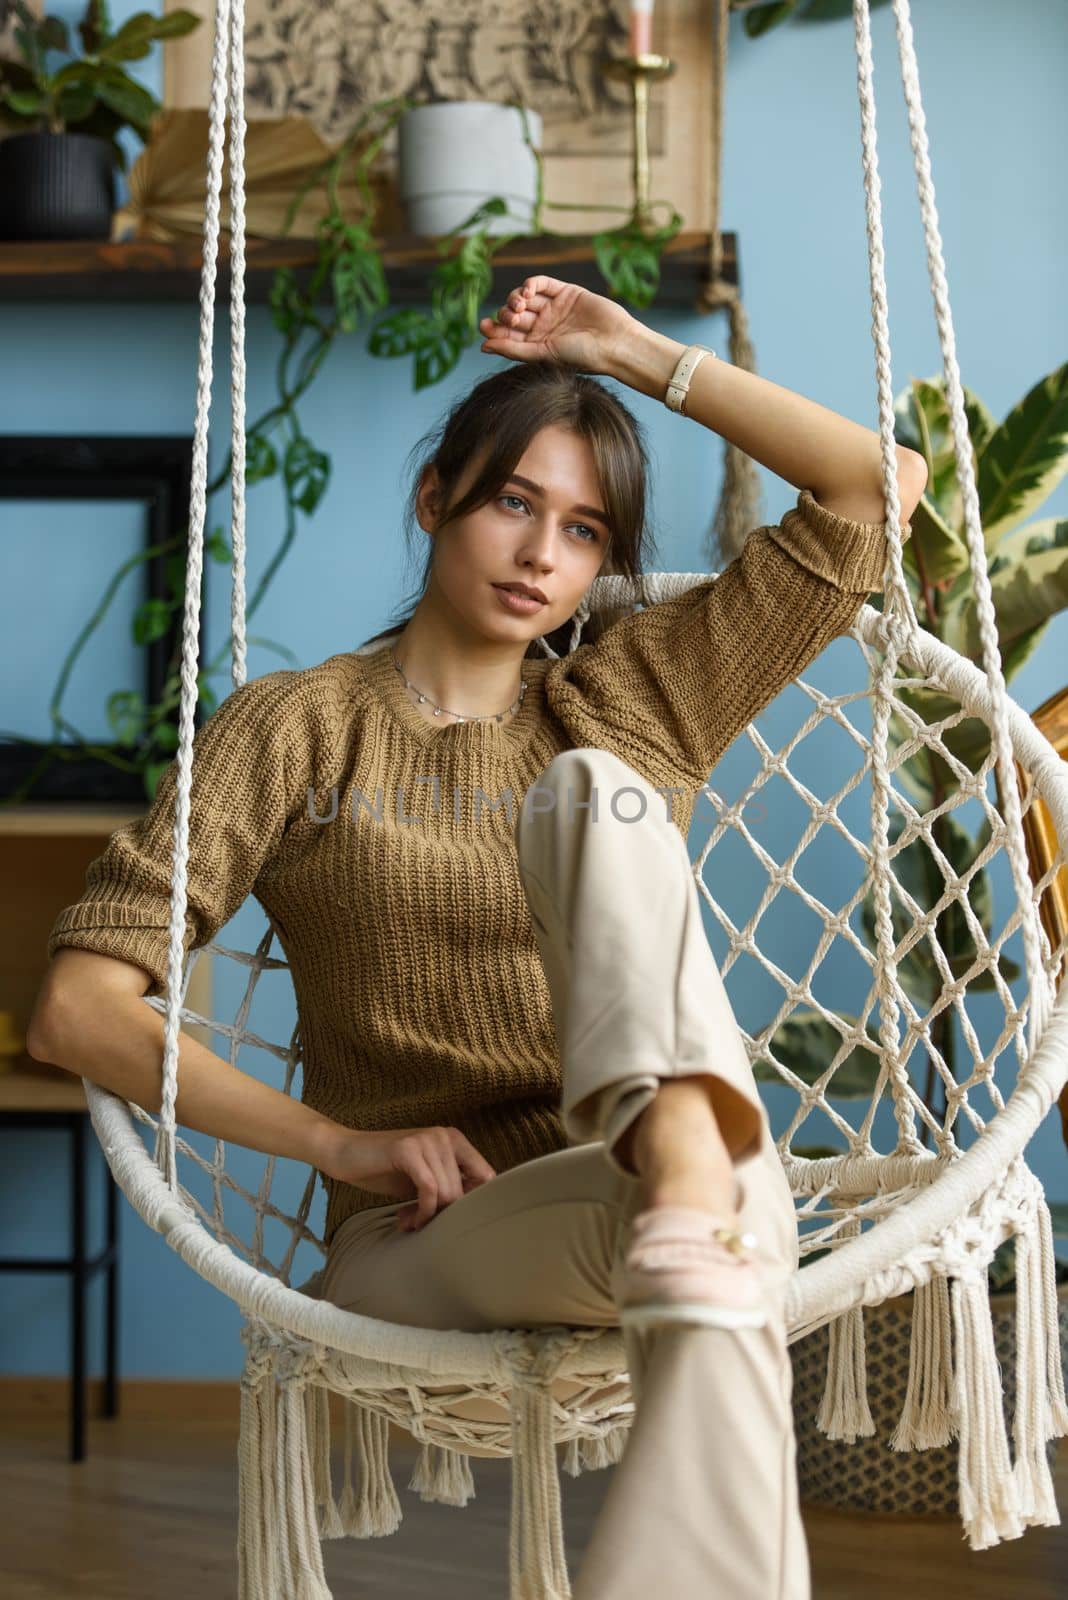 Young attractive woman chilling at home in comfortable hanging chair. beautiful slender girl in beige pants and olive sweater posing while sitting in a swing chair